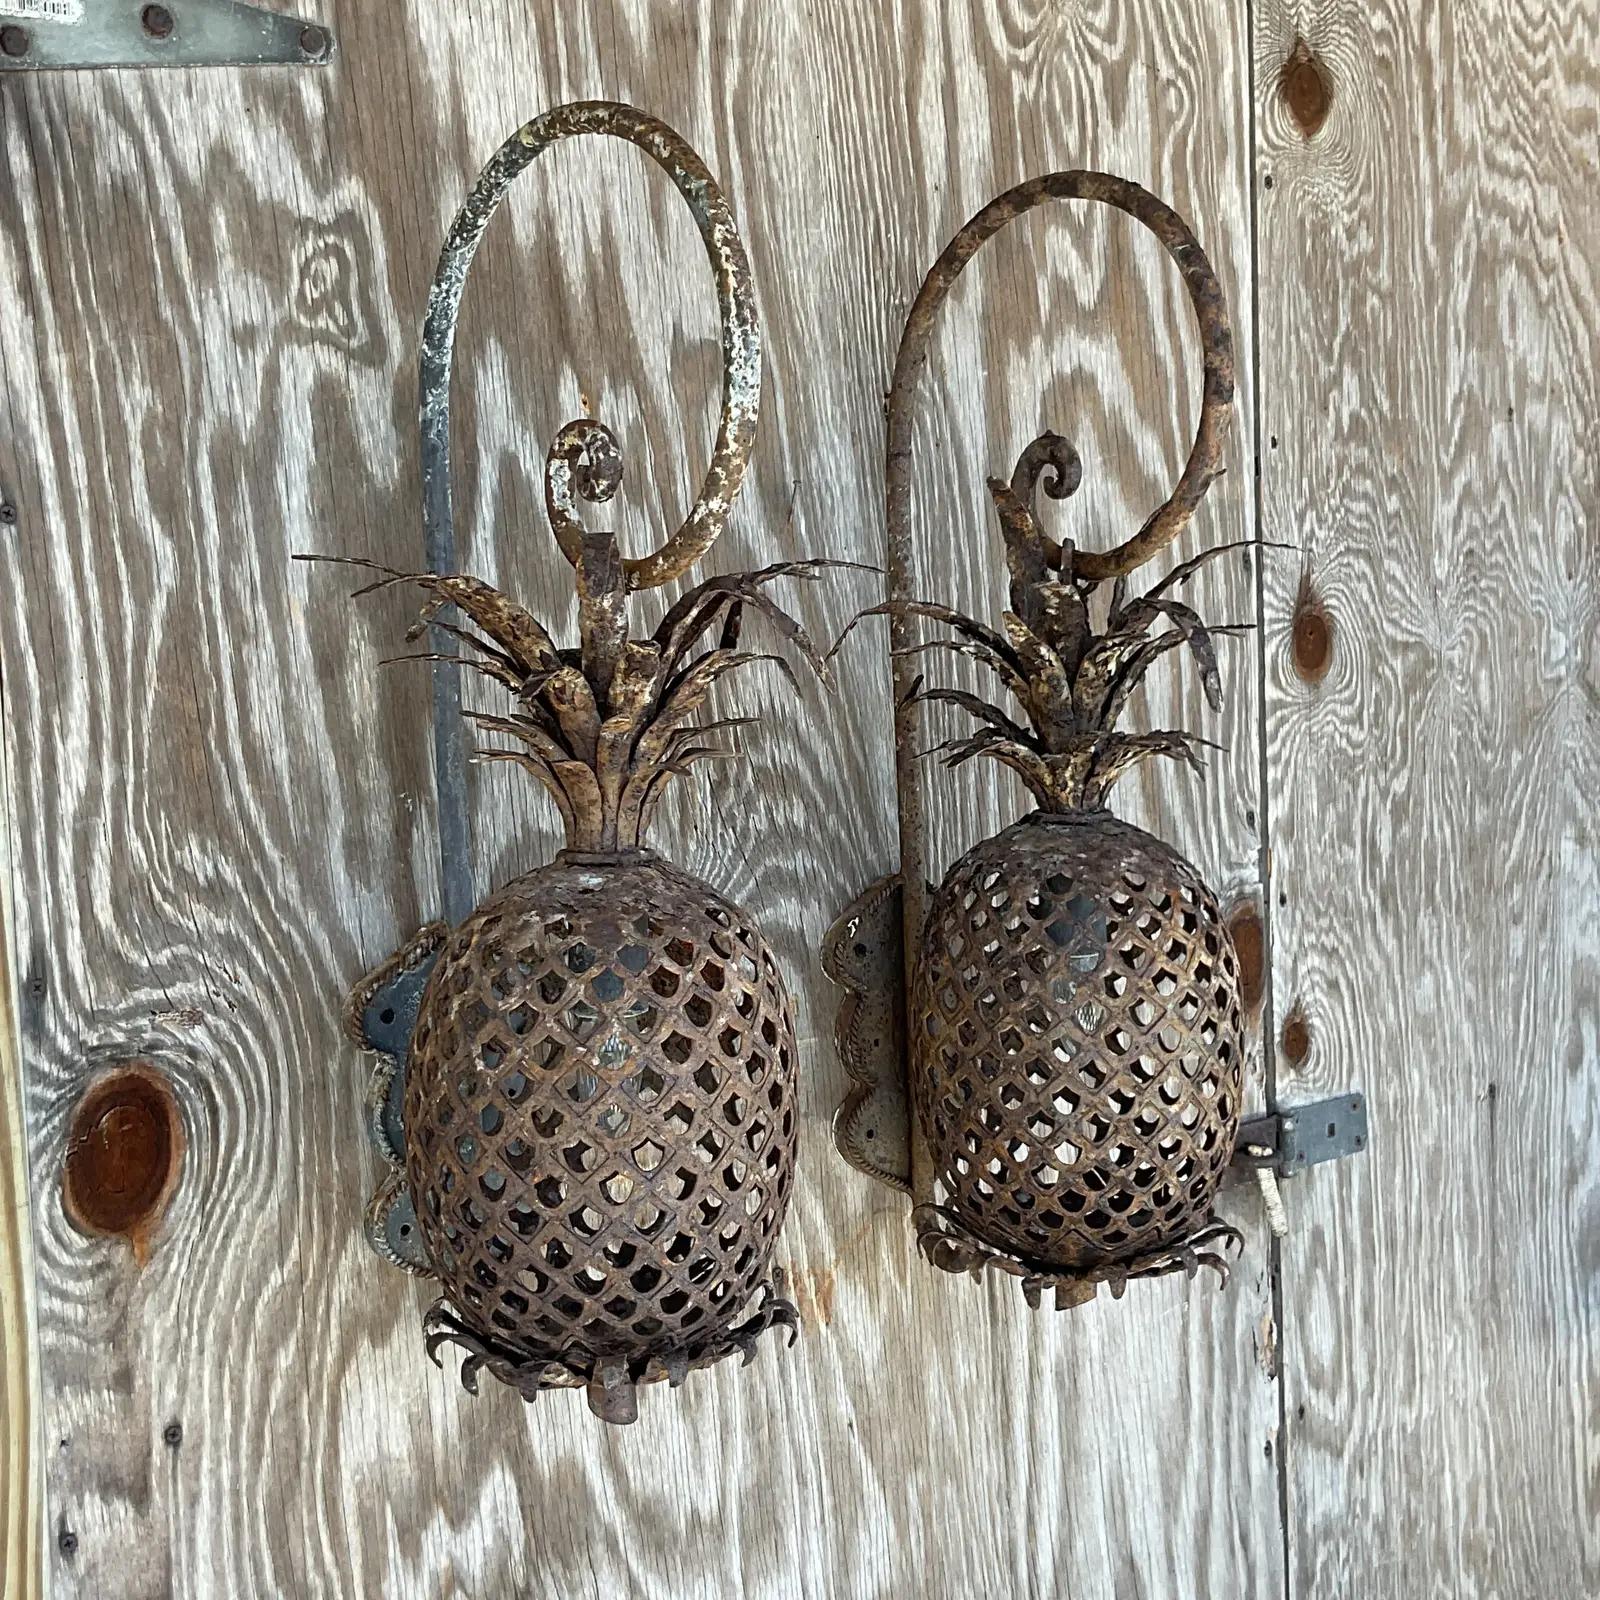 An incredible pair of vintage copper pineapple copper sconces. The most beautiful punch cut detail with lots of charming leaves. The perfect amount of distressed finish. Keep as is or paint them up. You decide! Acquired from a Palm Beach